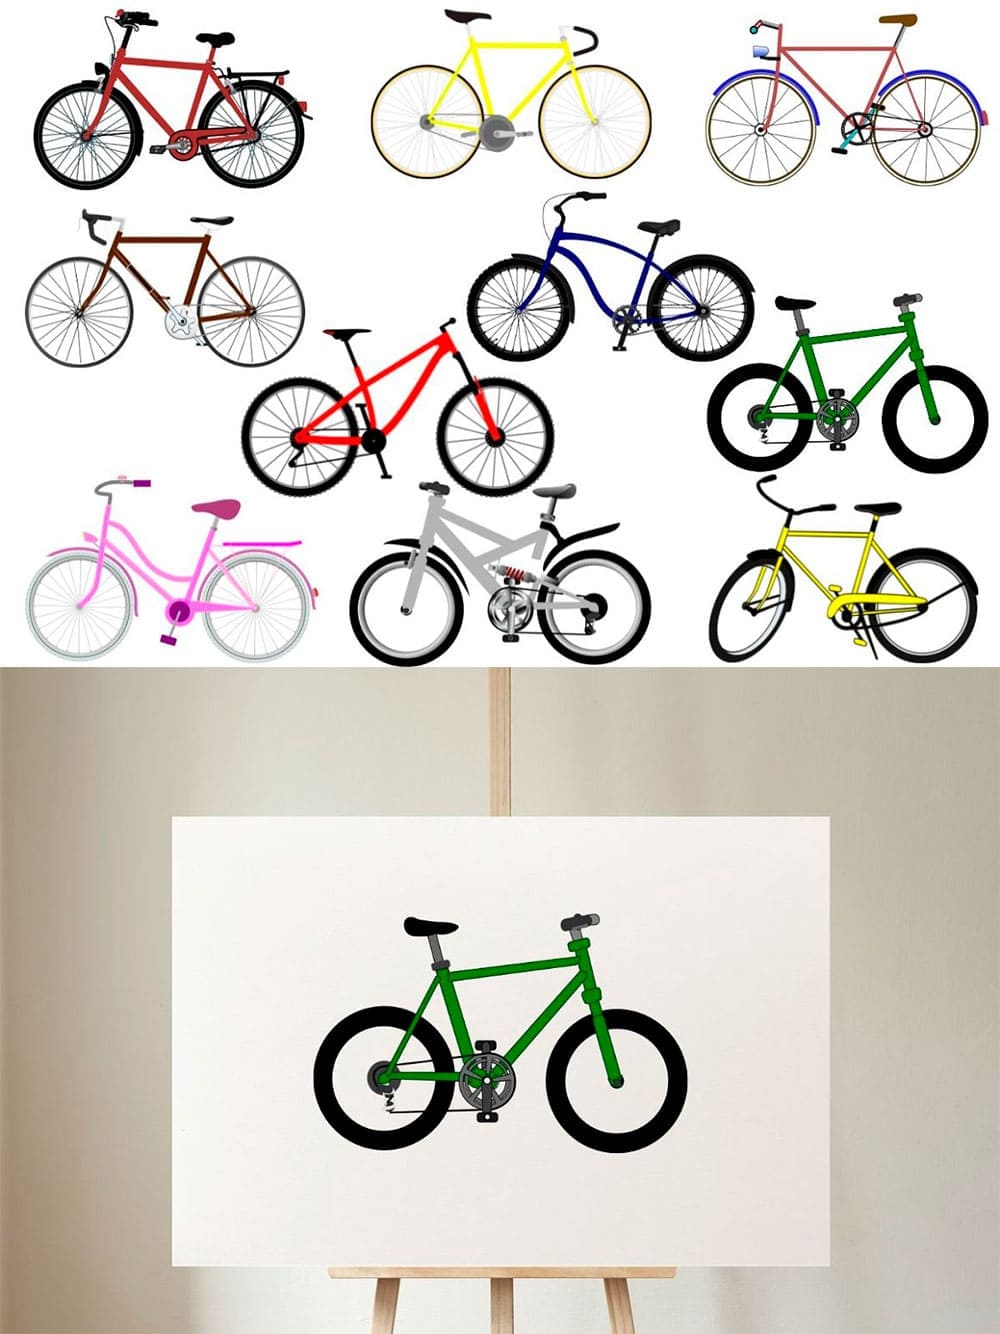 Bicycle vector illustration bundle, picture for pinterest.